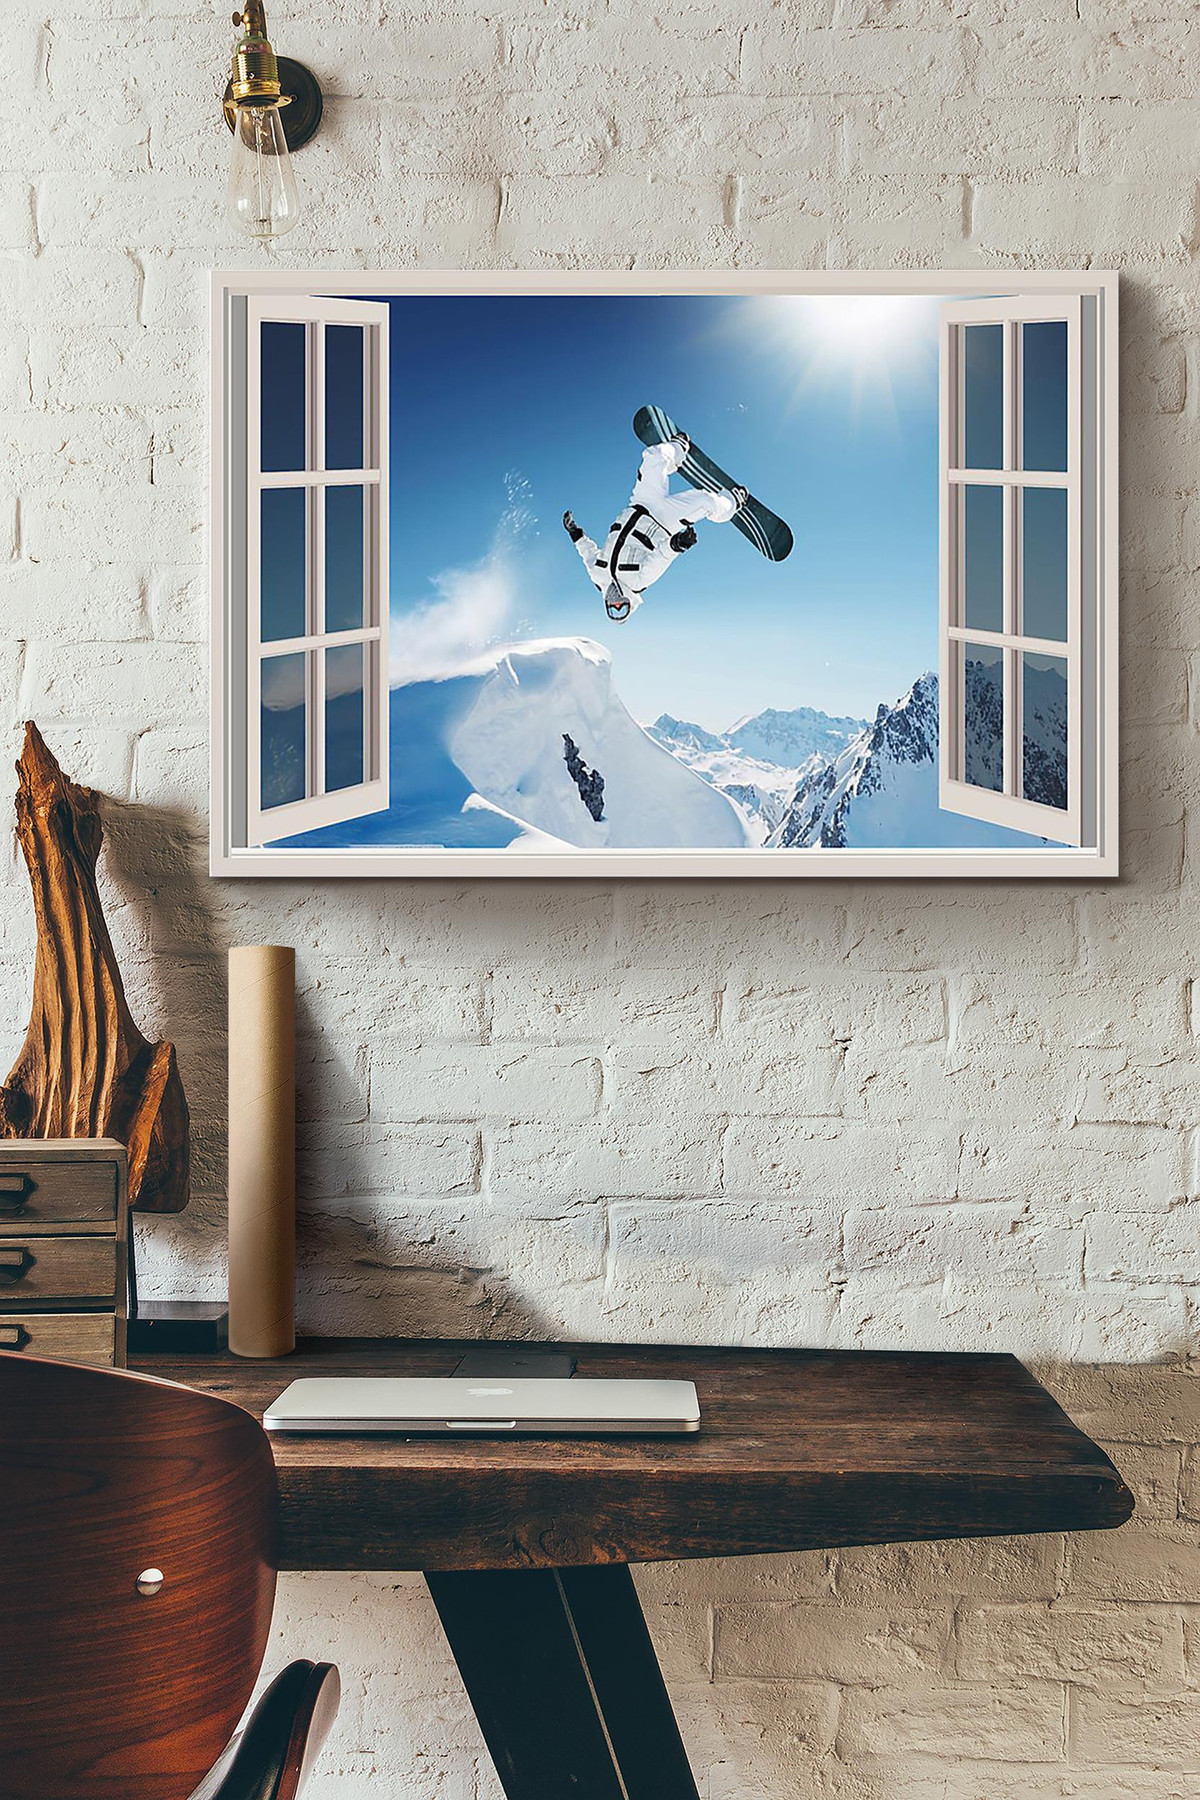 Skiing High Vintage 3D Window View Gift Idea Decor Framed Prints, Canvas Paintings Wrapped Canvas 8x10